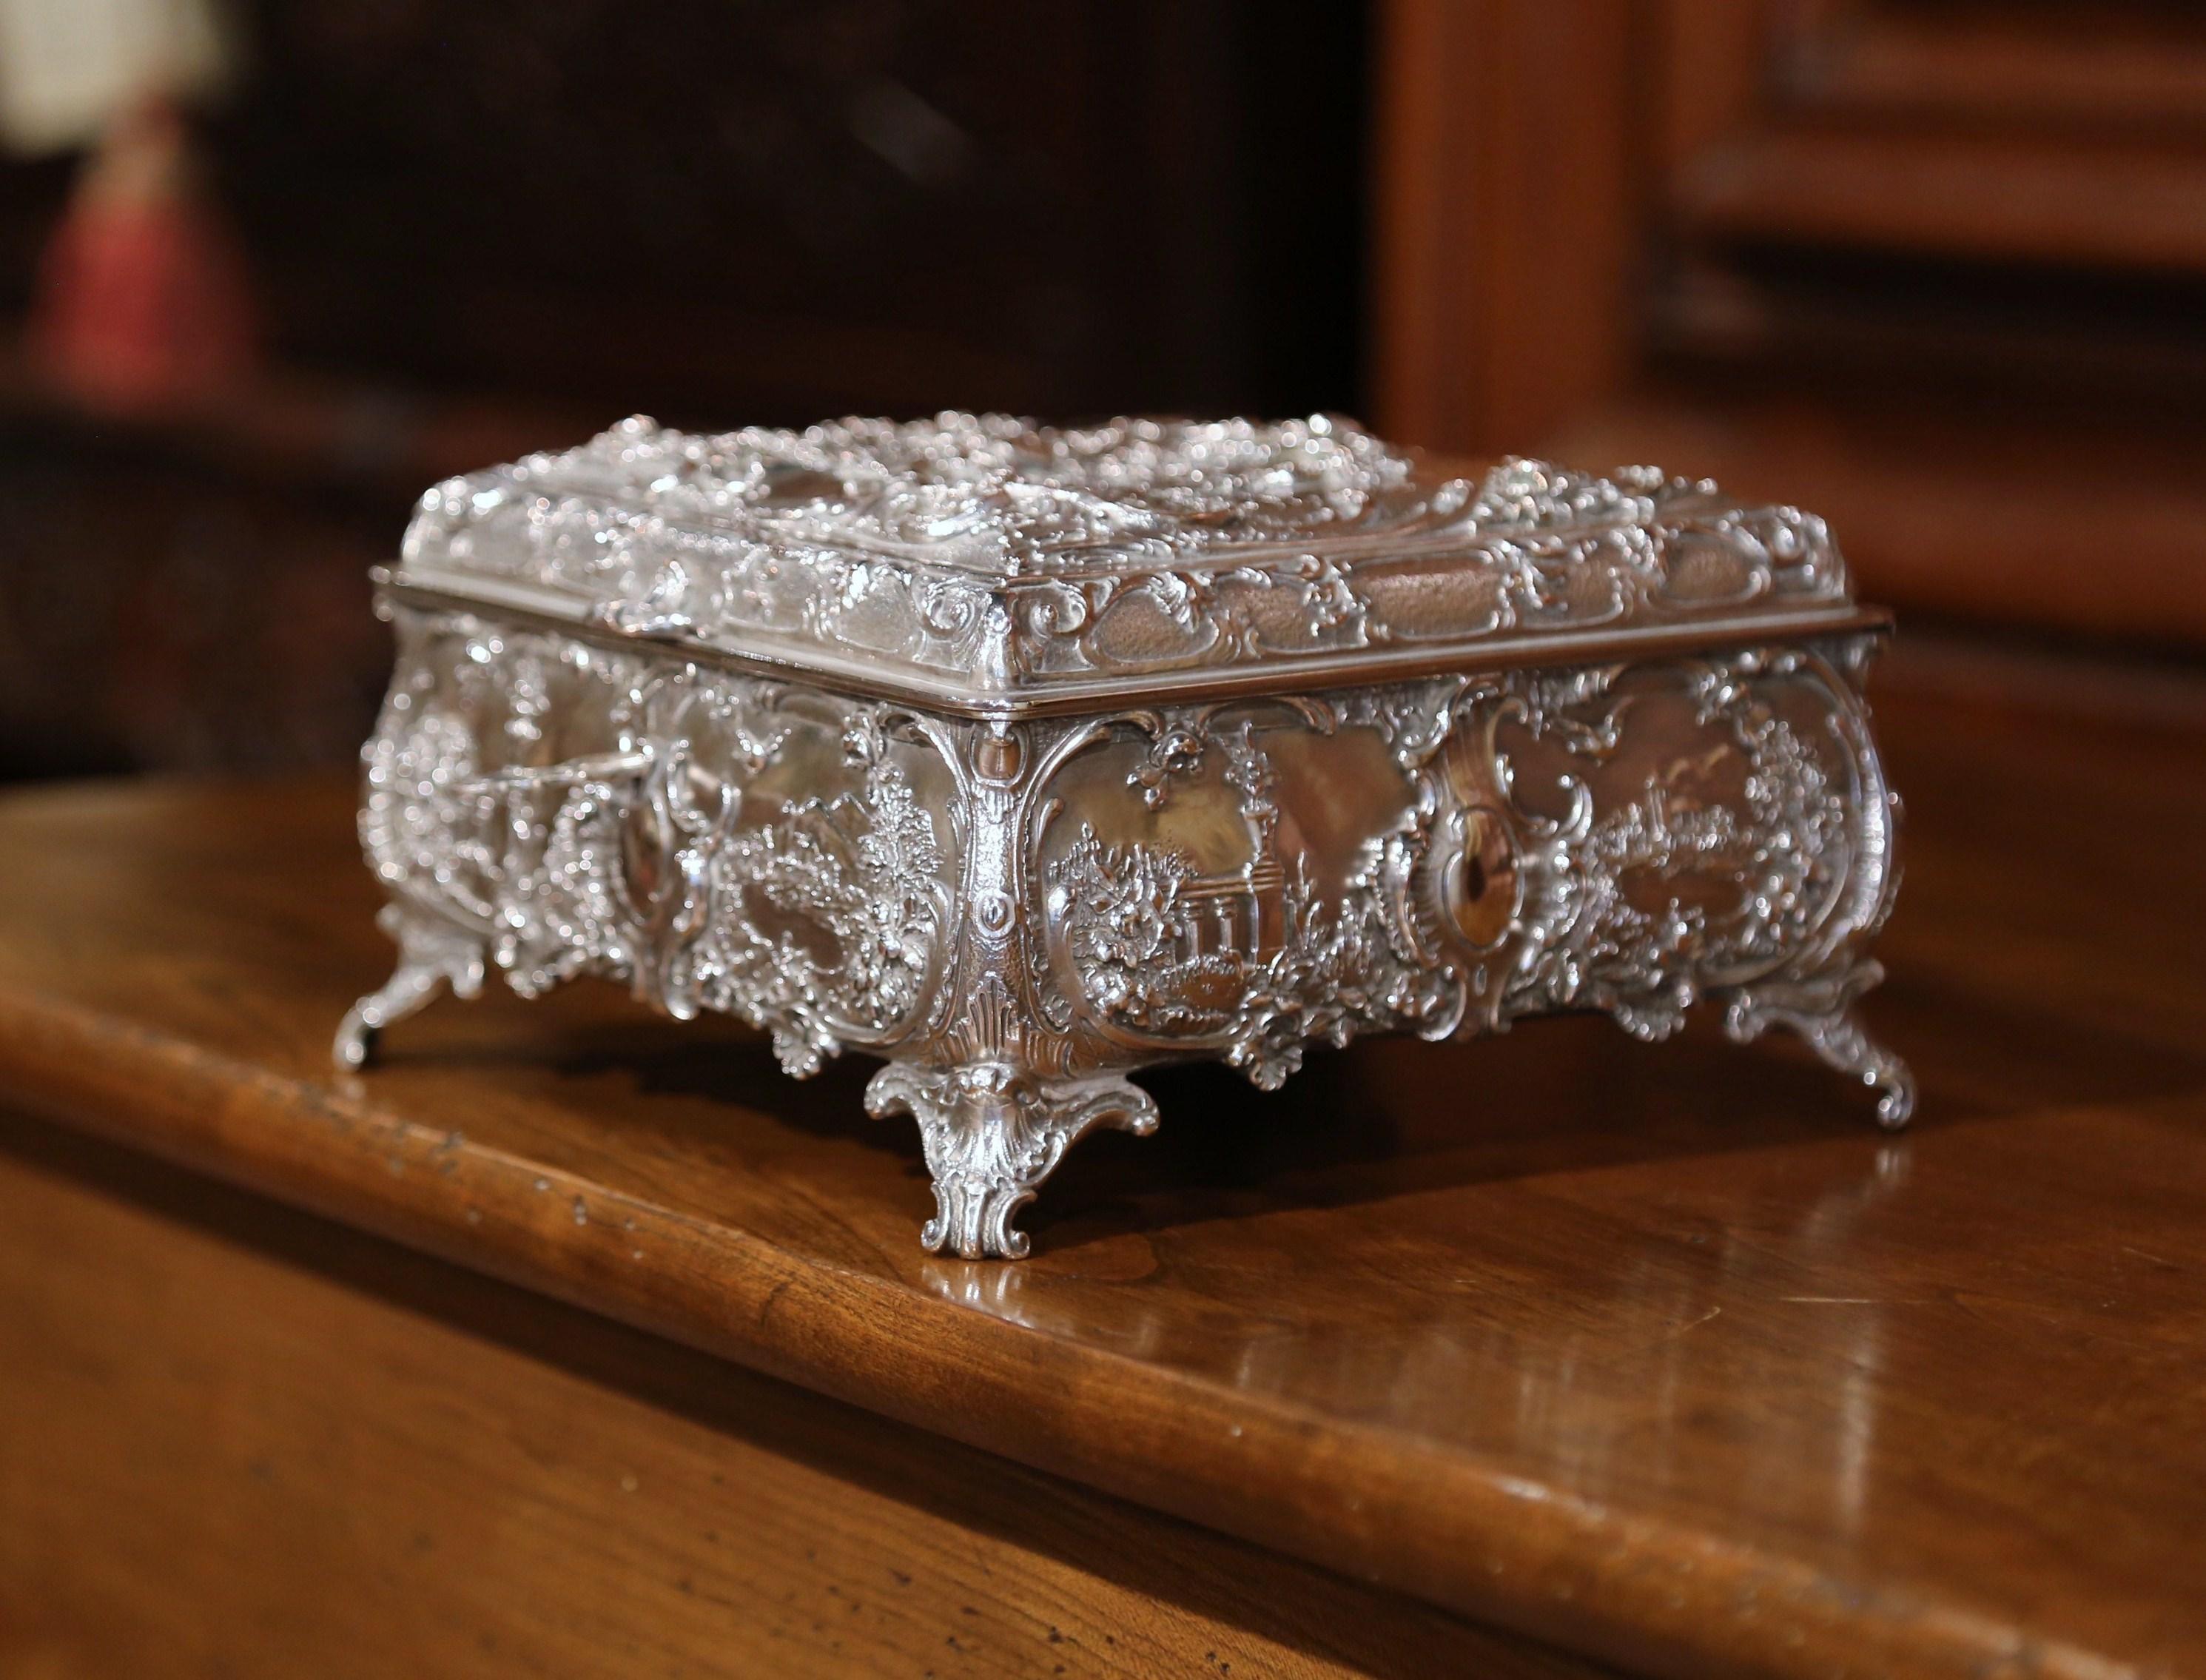 Place this elegant antique silver coated copper box in your master bath to keep your jewelry safe and organized. Crafted in England circa 1880, the ornate square casket sits on intricate scroll feet; the box features four bow sides decorated with